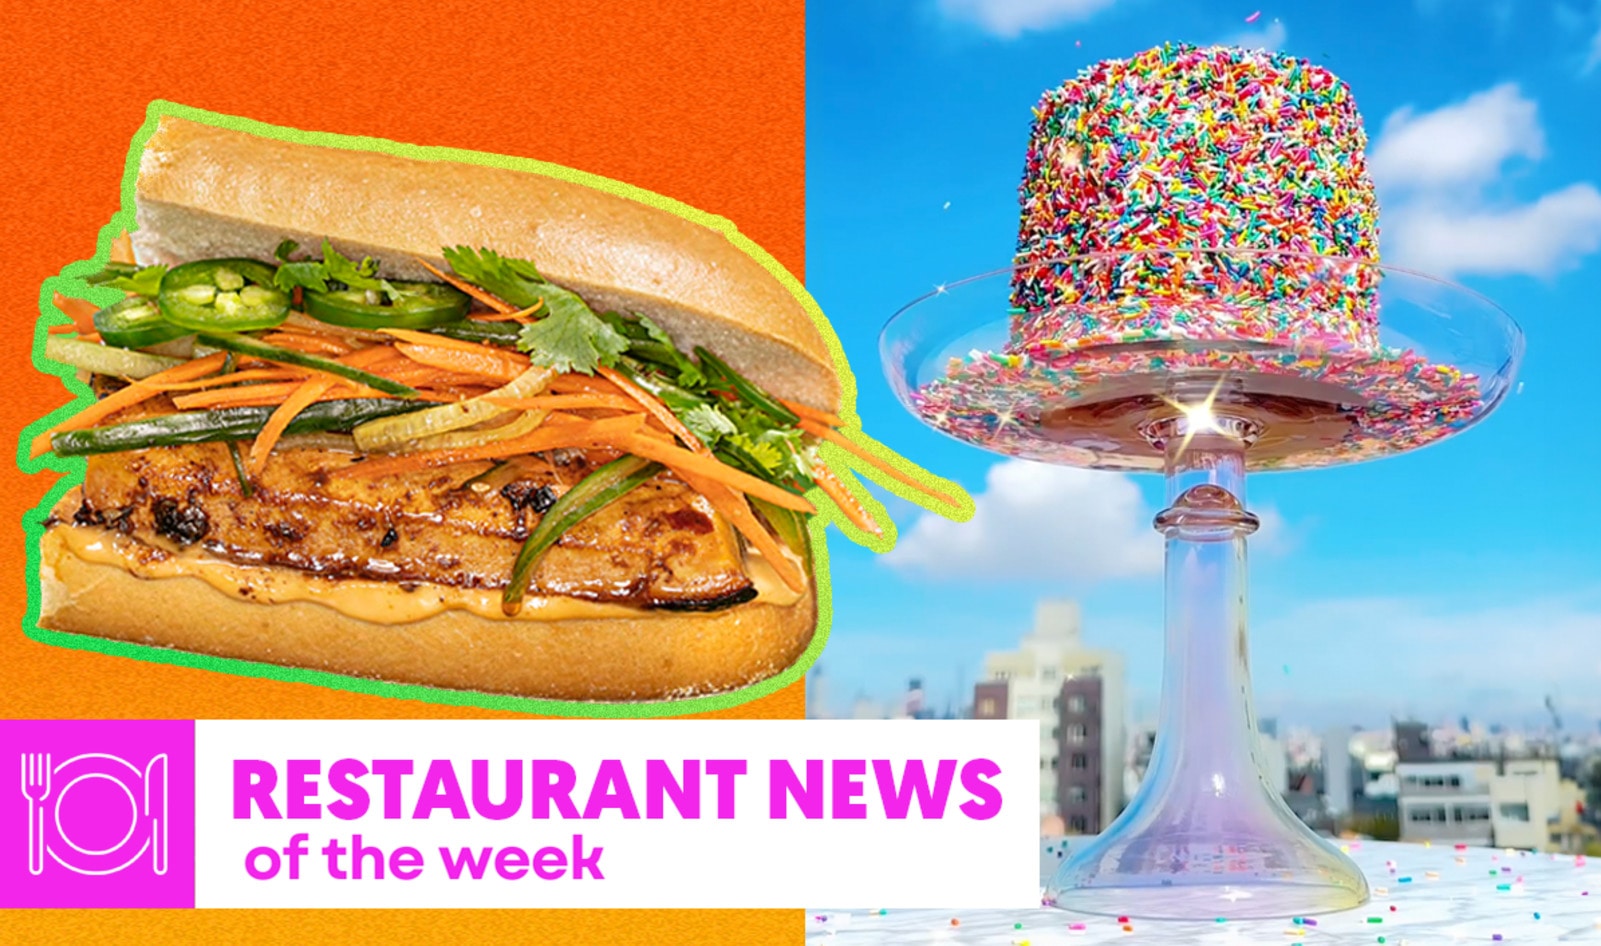 Vegan Restaurant News of the Week: Indian Fusion in Venice, Top Chef Pop-Ups, and More